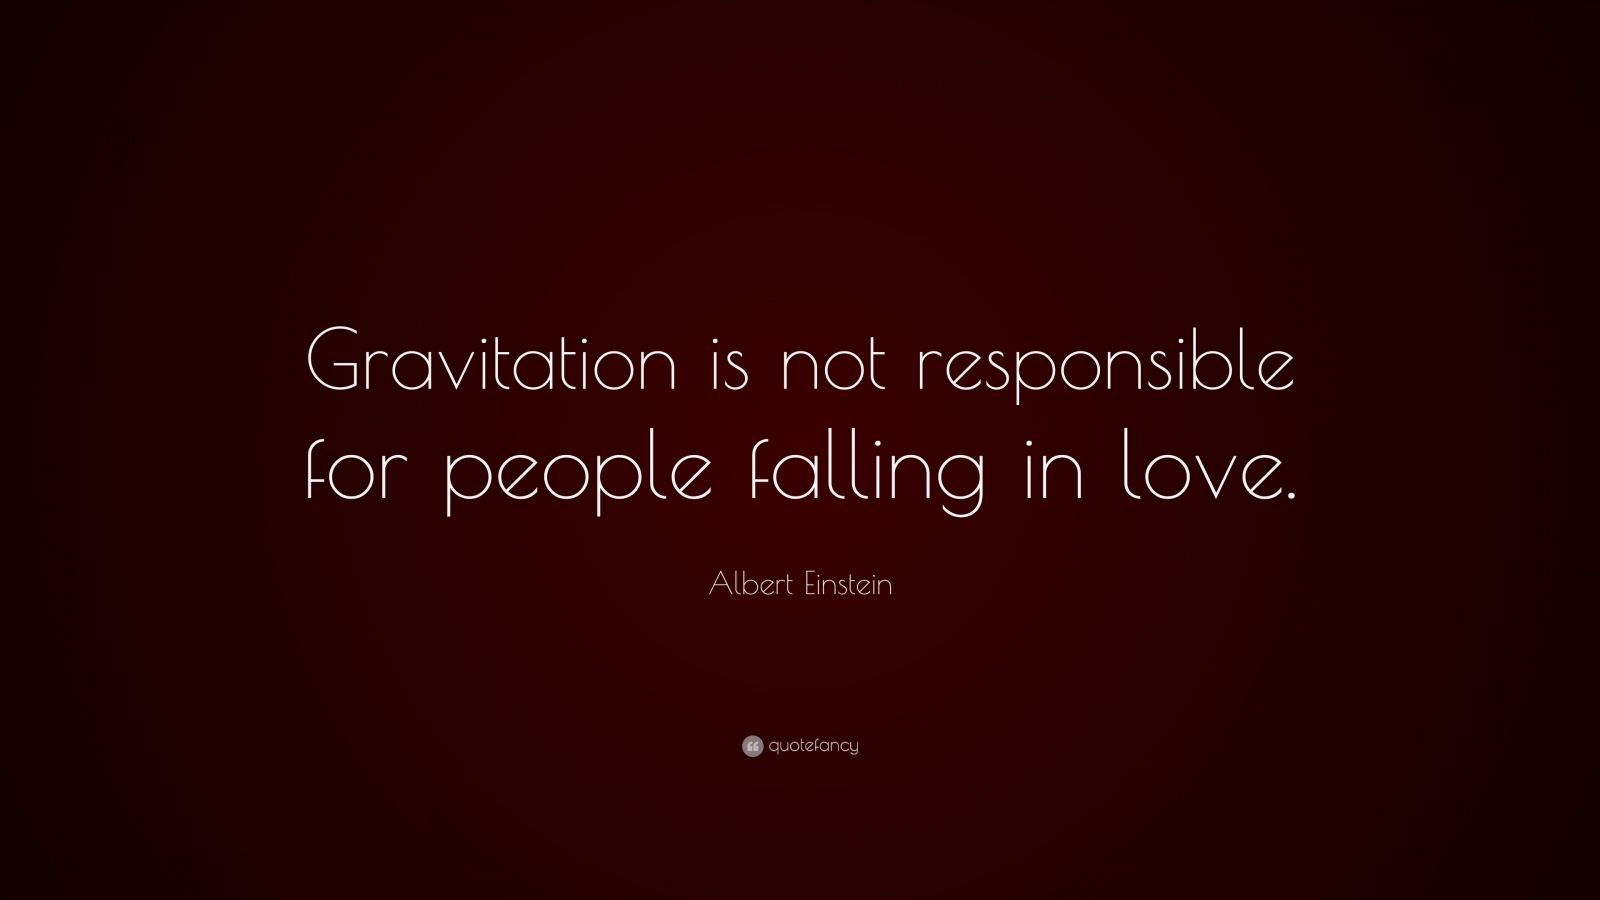 Gravitation is not responsible for people falling in love. â€